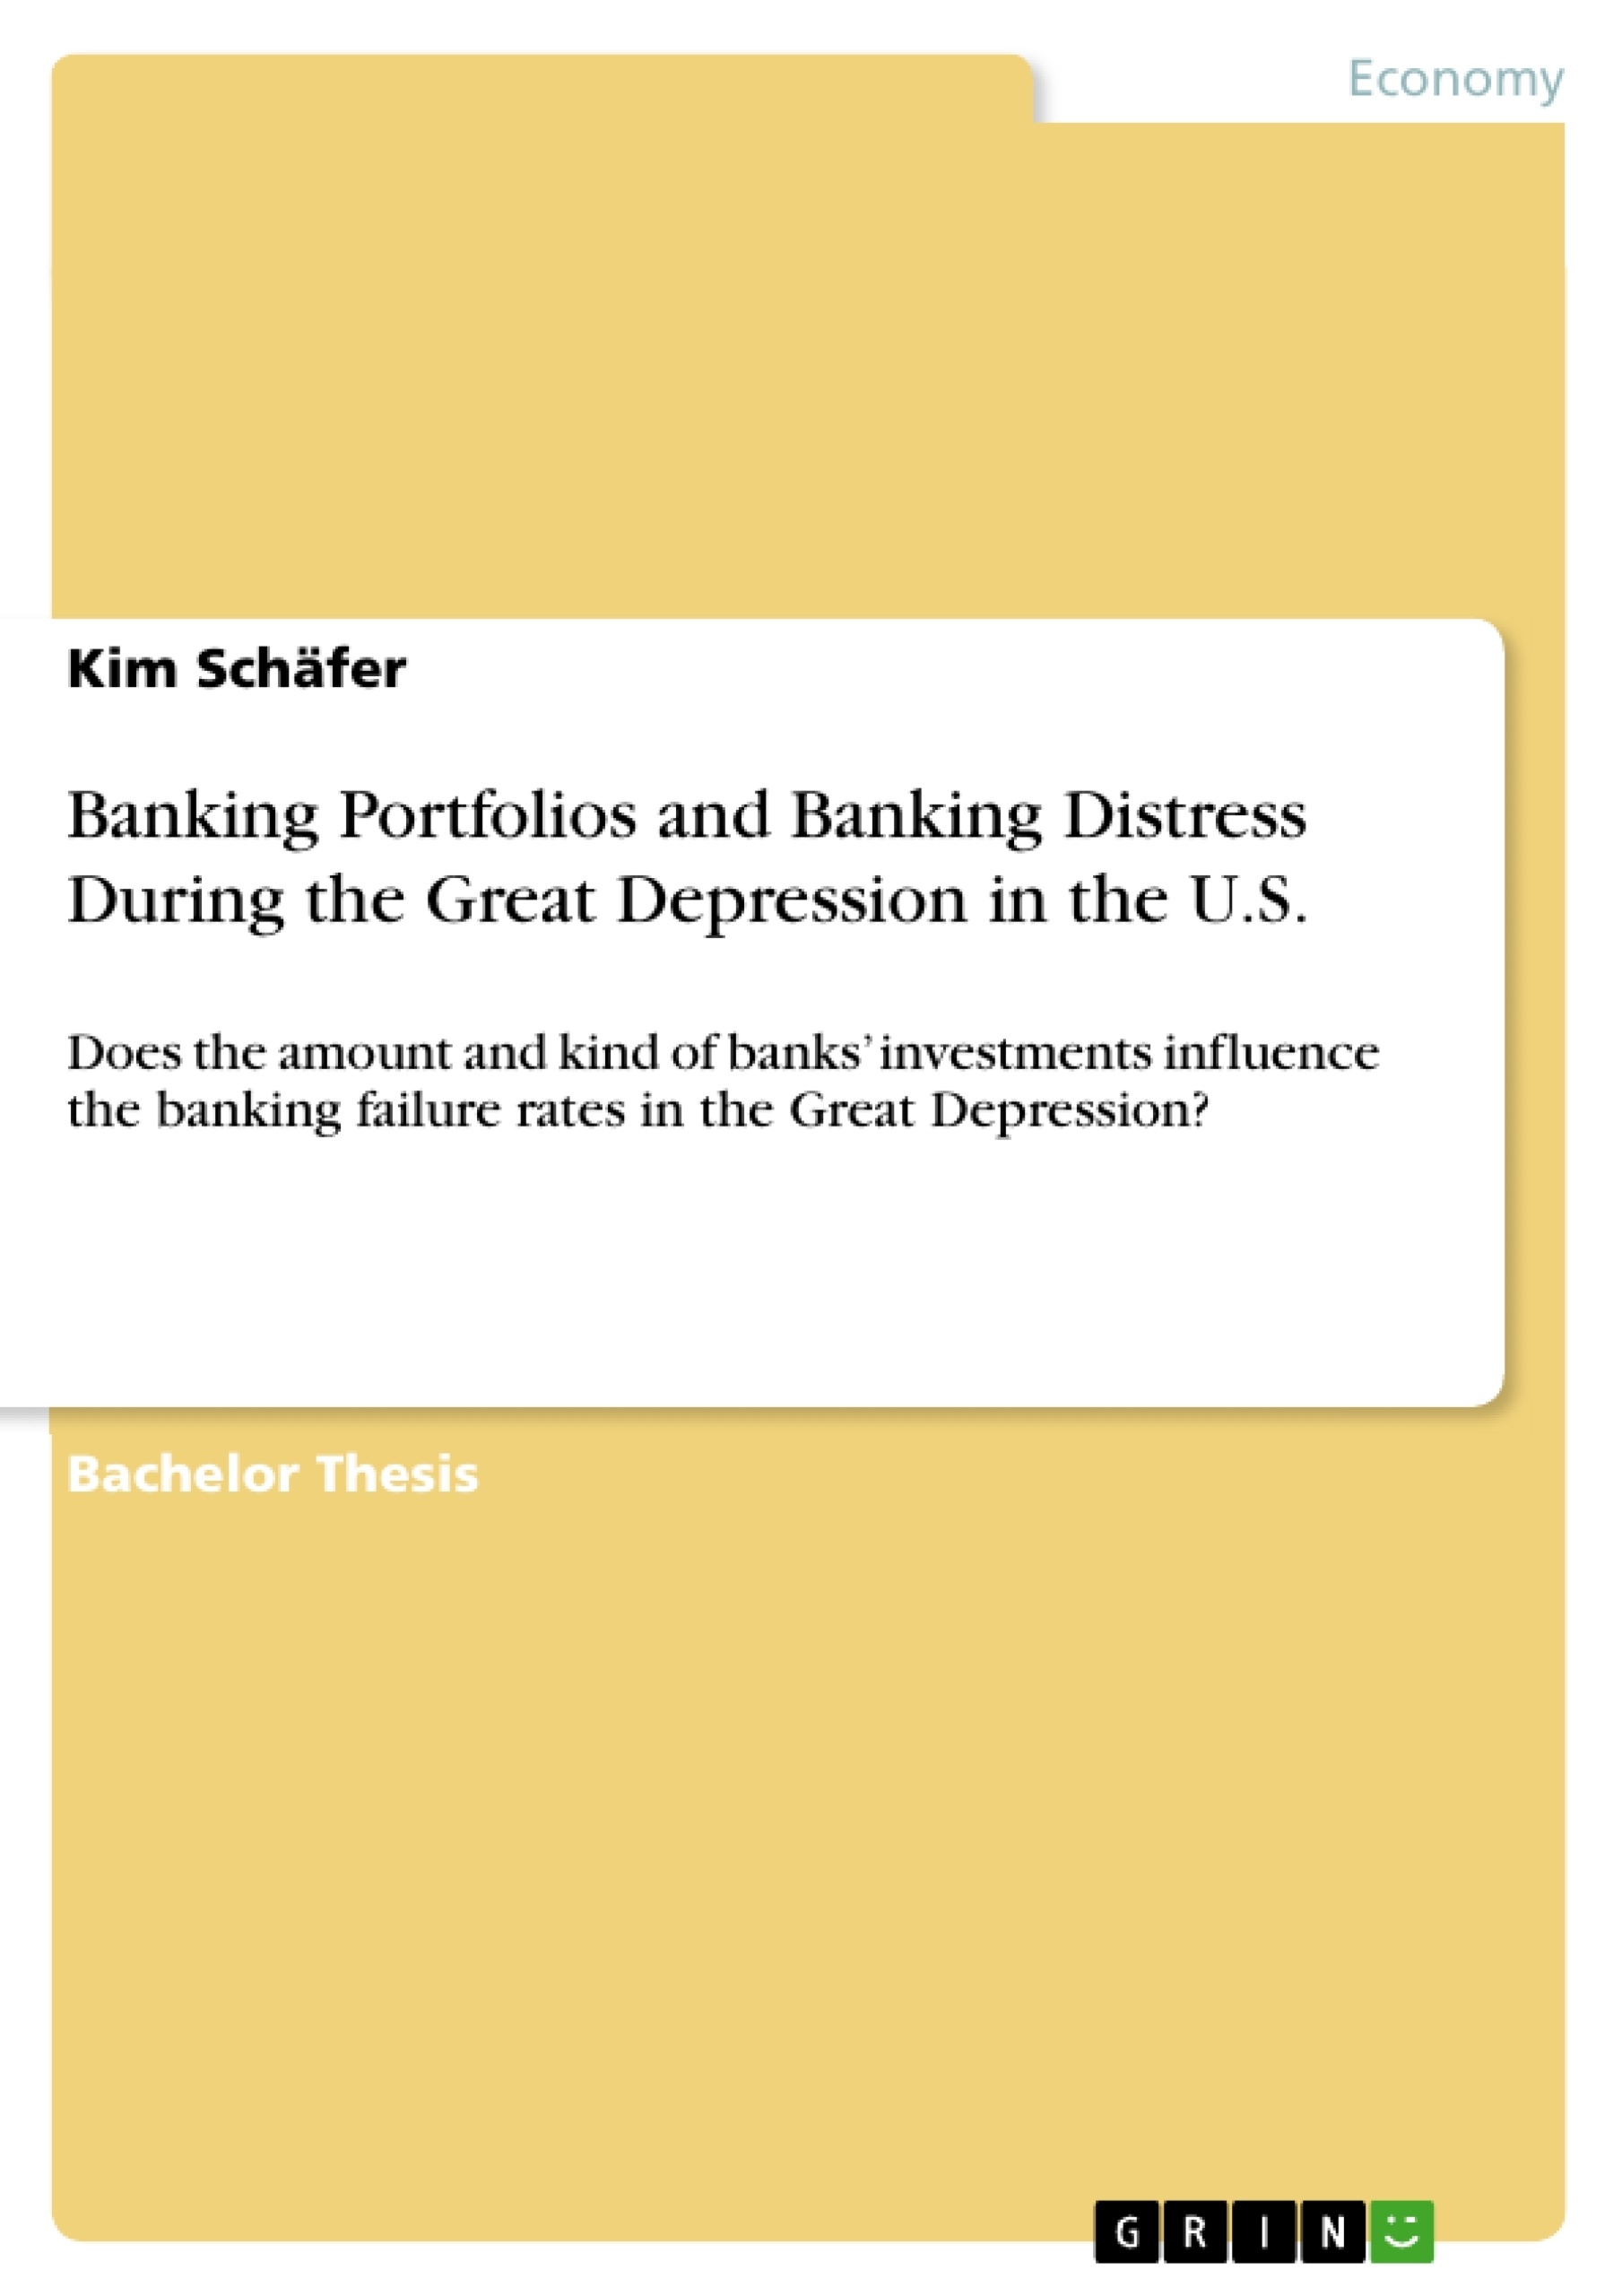 Titre: Banking Portfolios and Banking Distress During the Great Depression in the U.S.